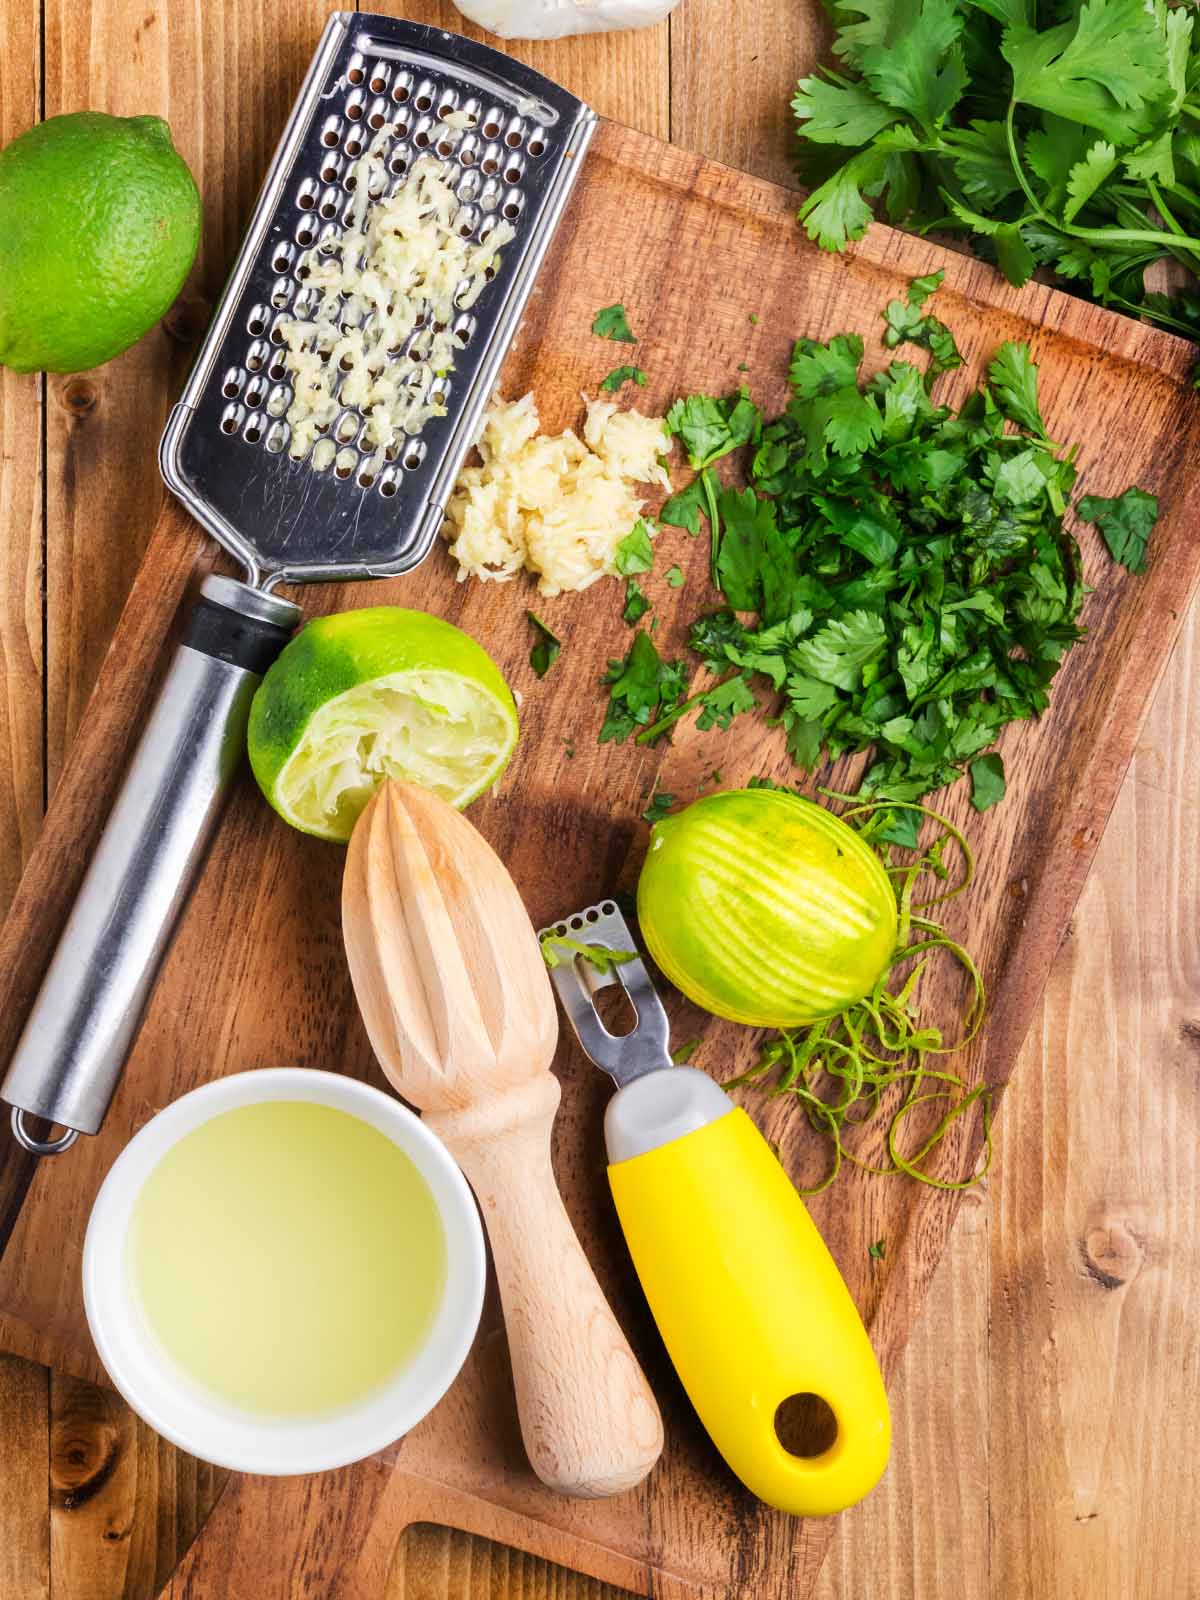 Zesting limes and chopped cilantro on a chopping board.